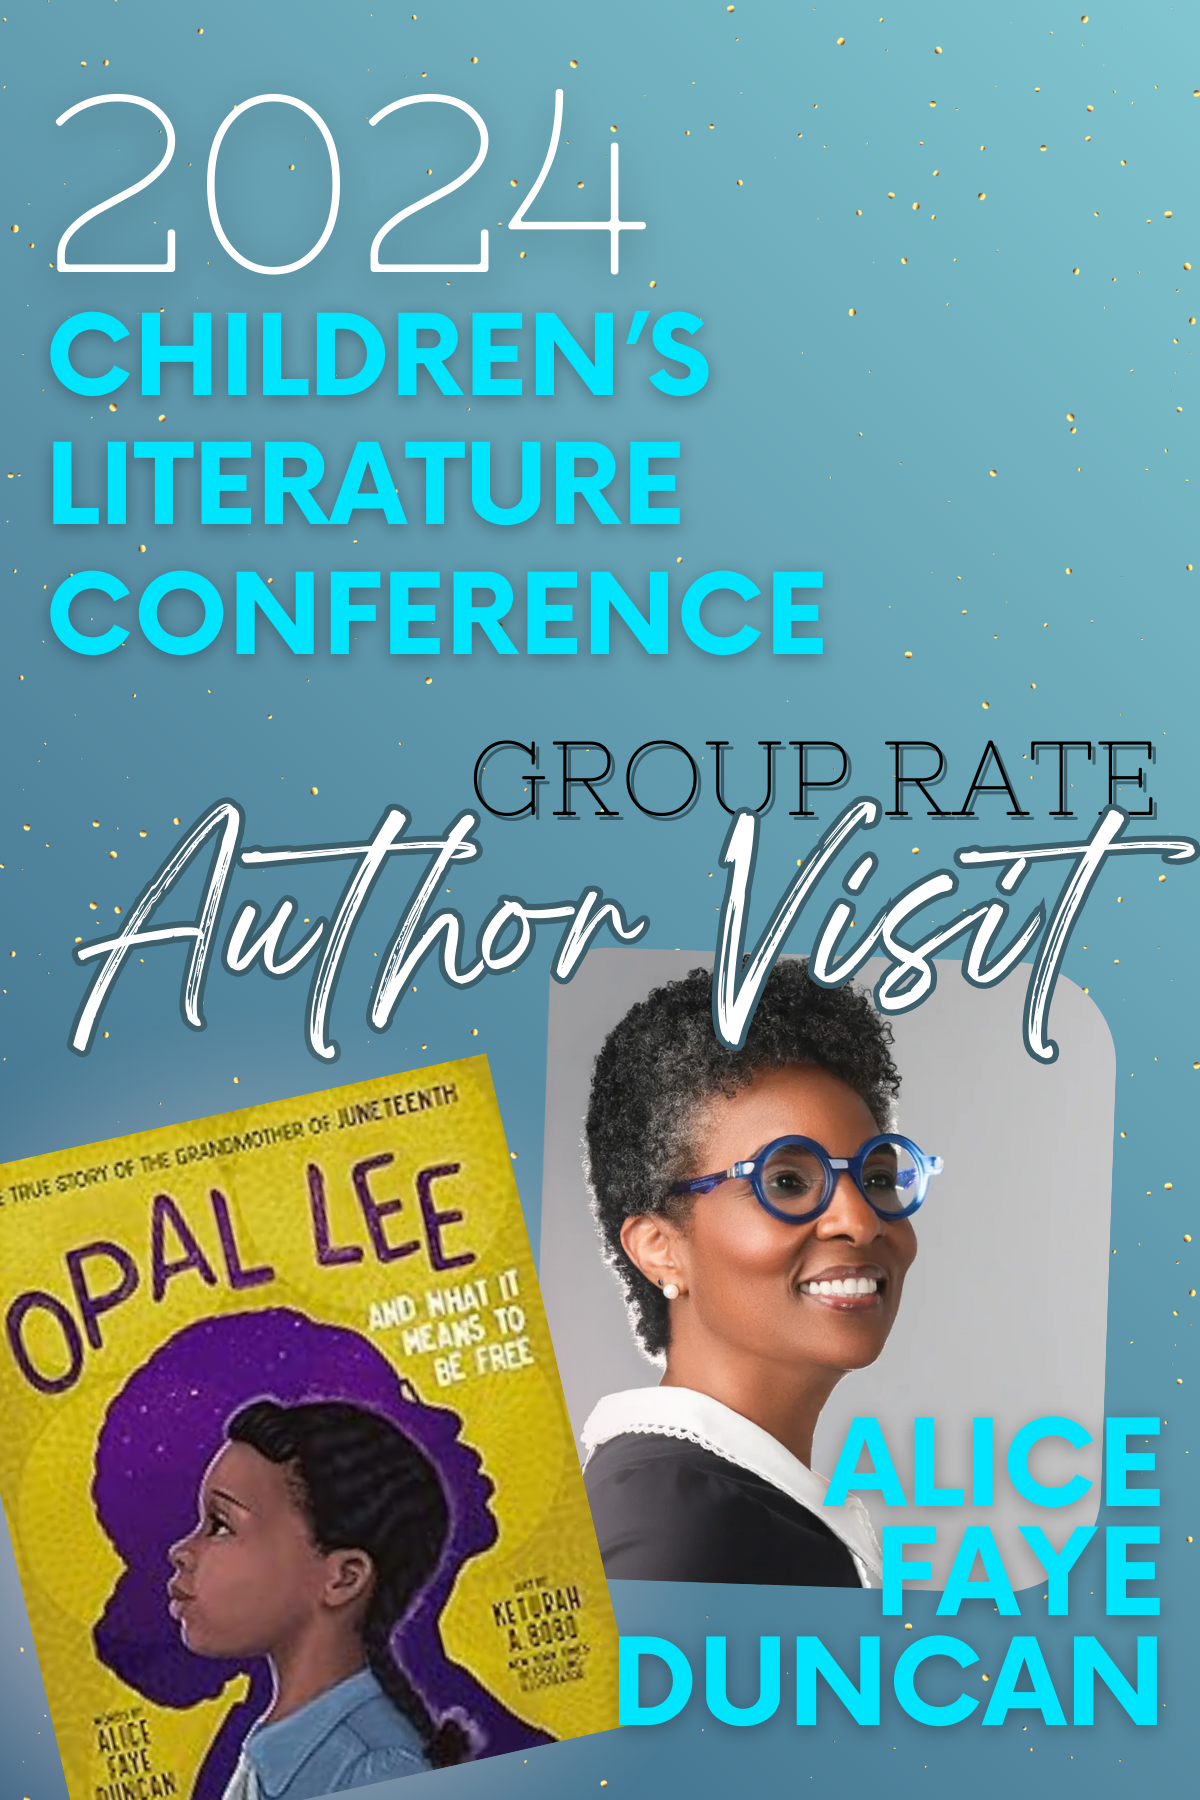 GROUP RATE: Virtual Author Visit & Corresponding Happy Hour with Alice Faye Duncan